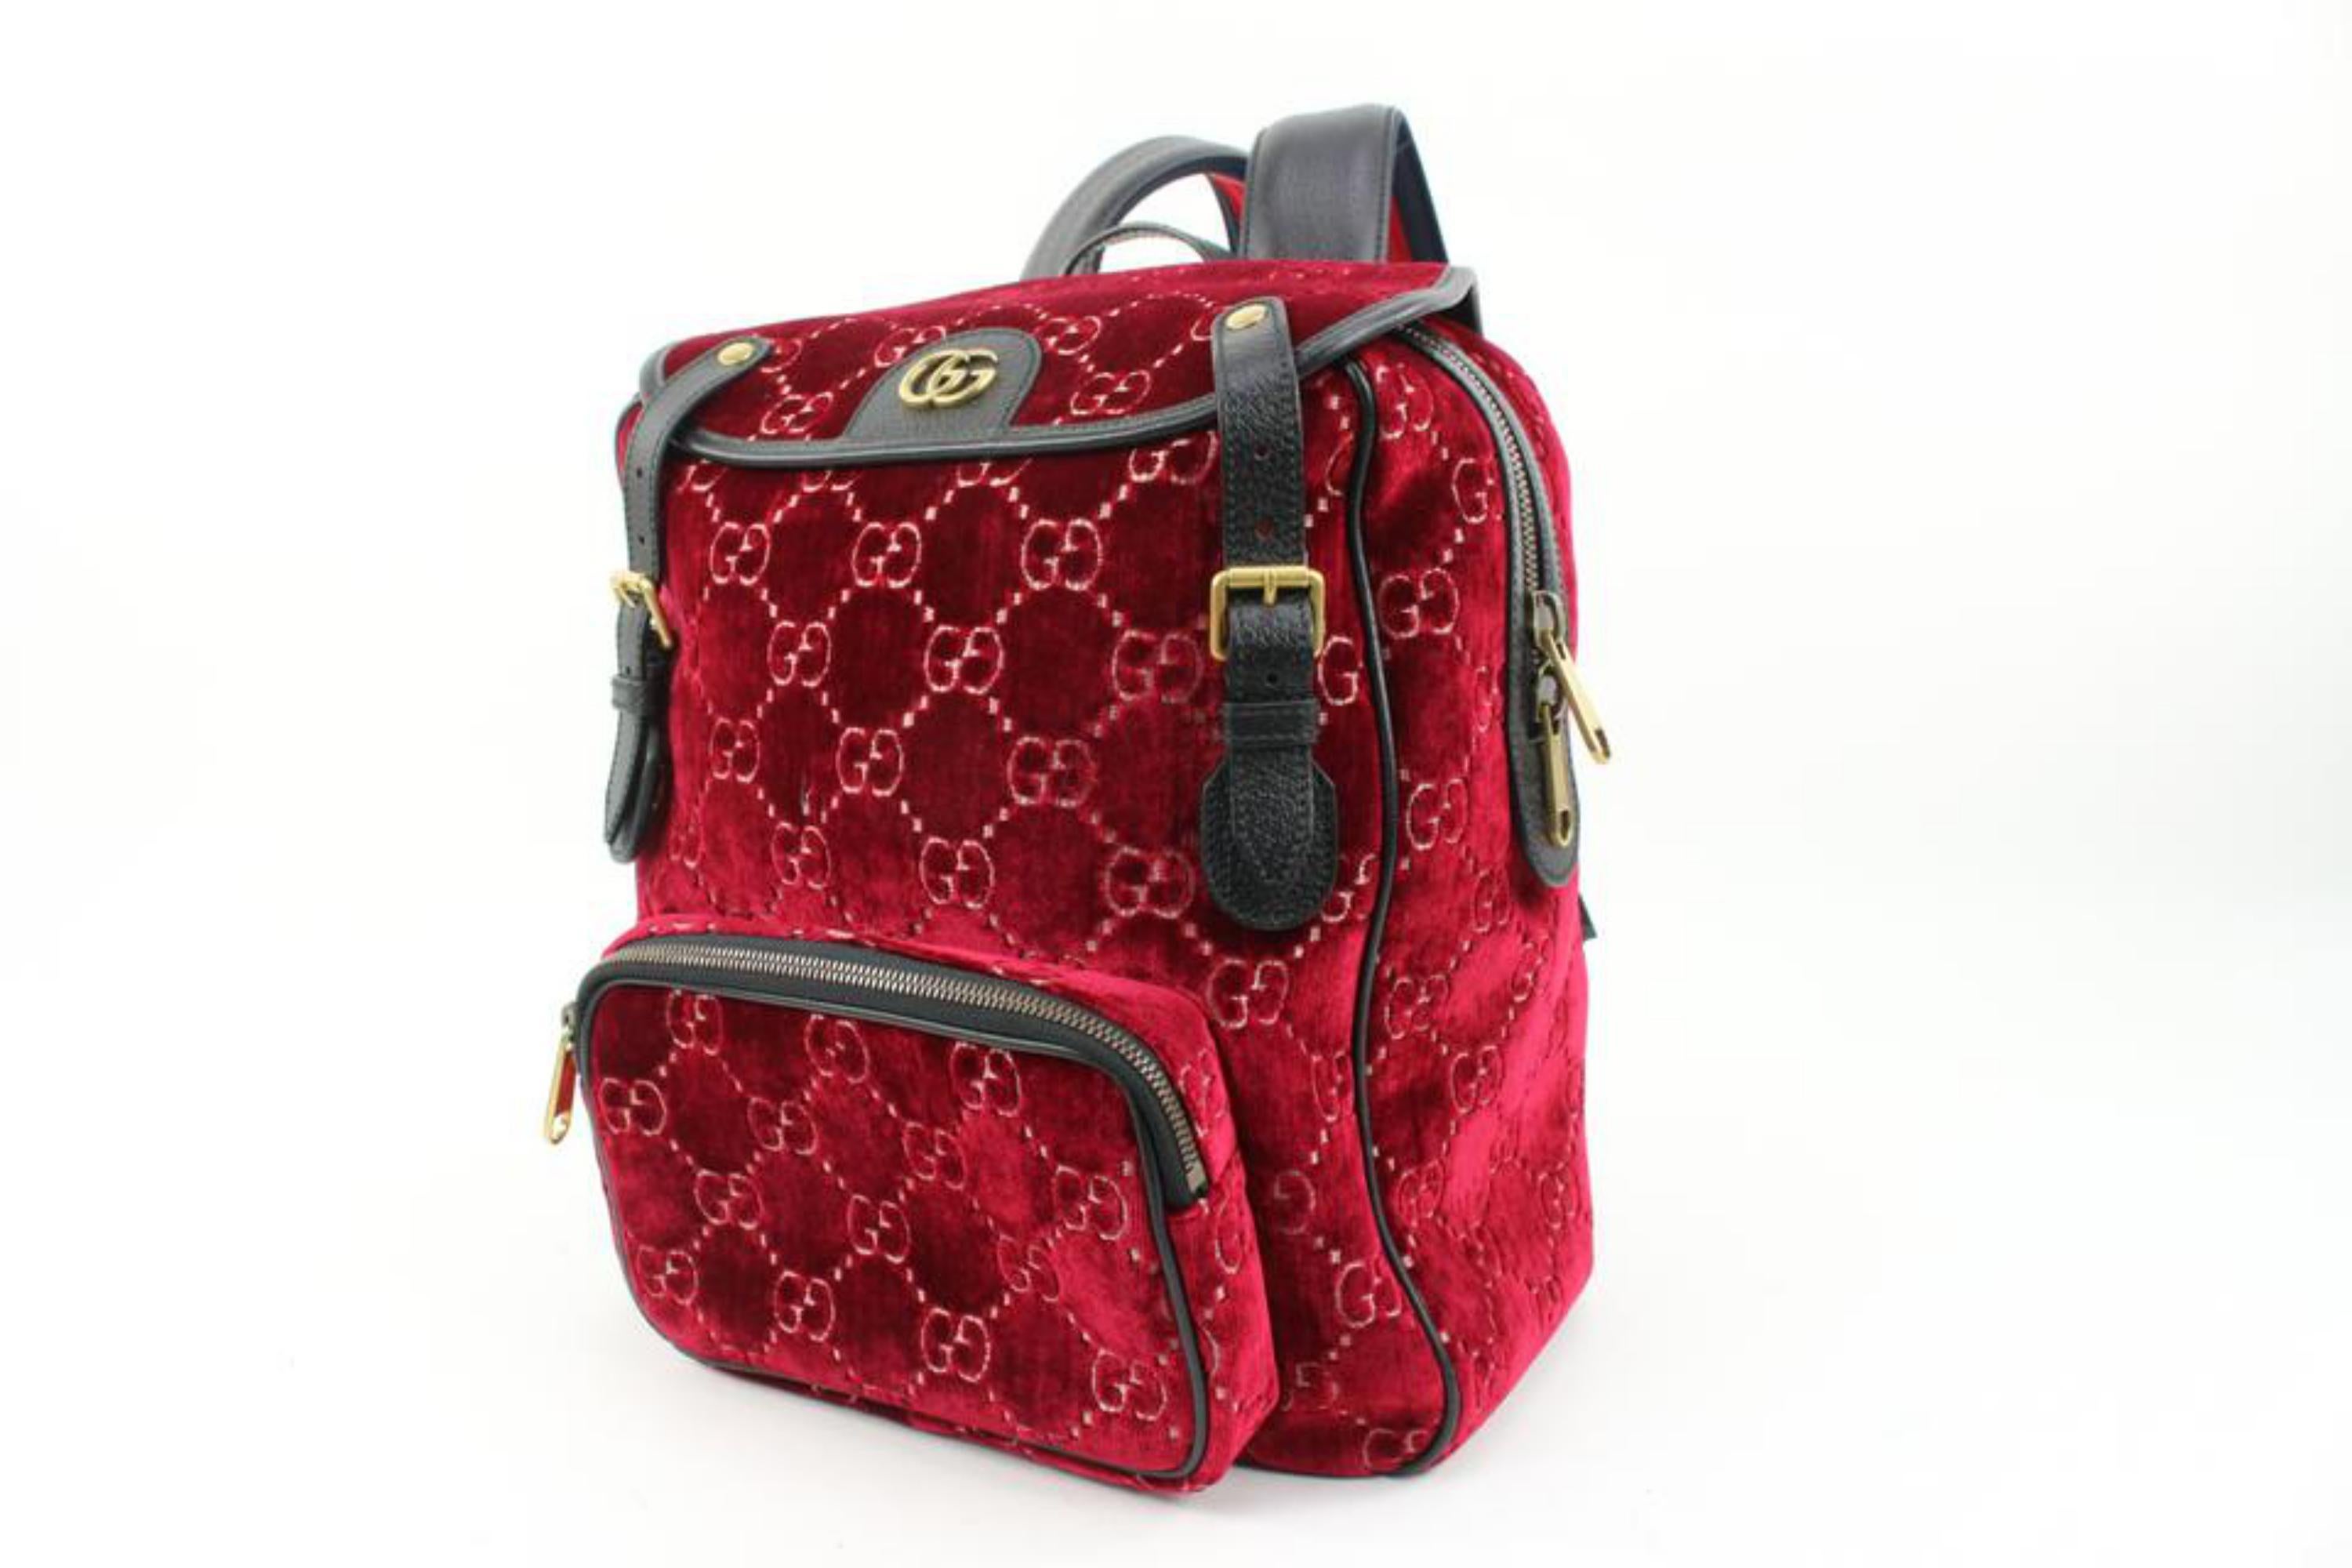 Gucci Red Monogram GG Velvet Marmont Small Double Buckle Backpack 58g128s
Date Code/Serial Number: 574942 001998
Made In: Italy
Measurements: Length:  11.5